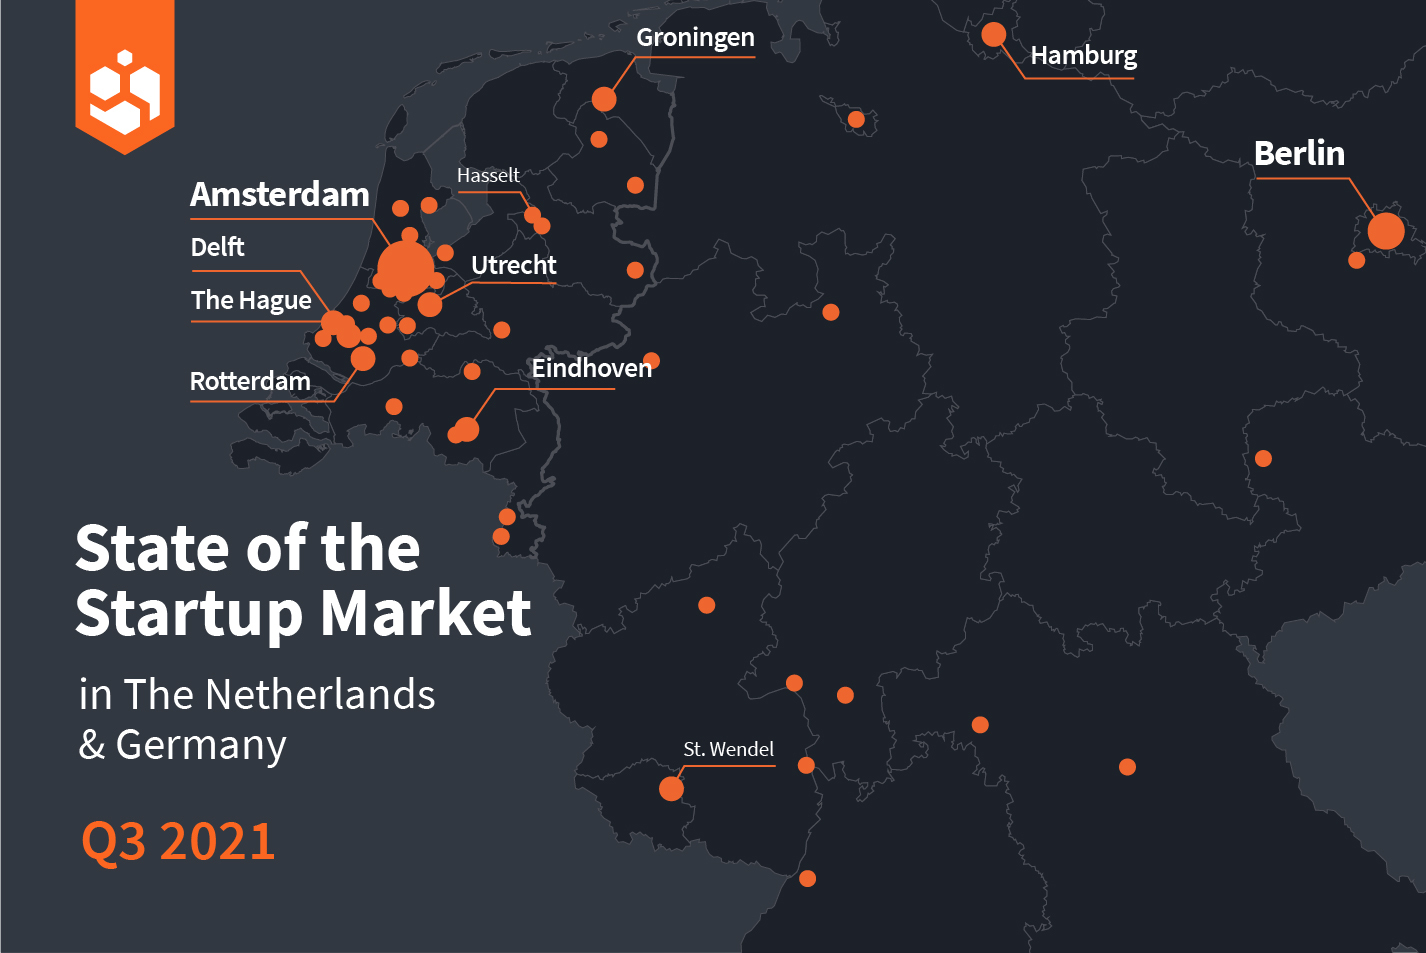 A map of the startup market in the Netherlands & Germany